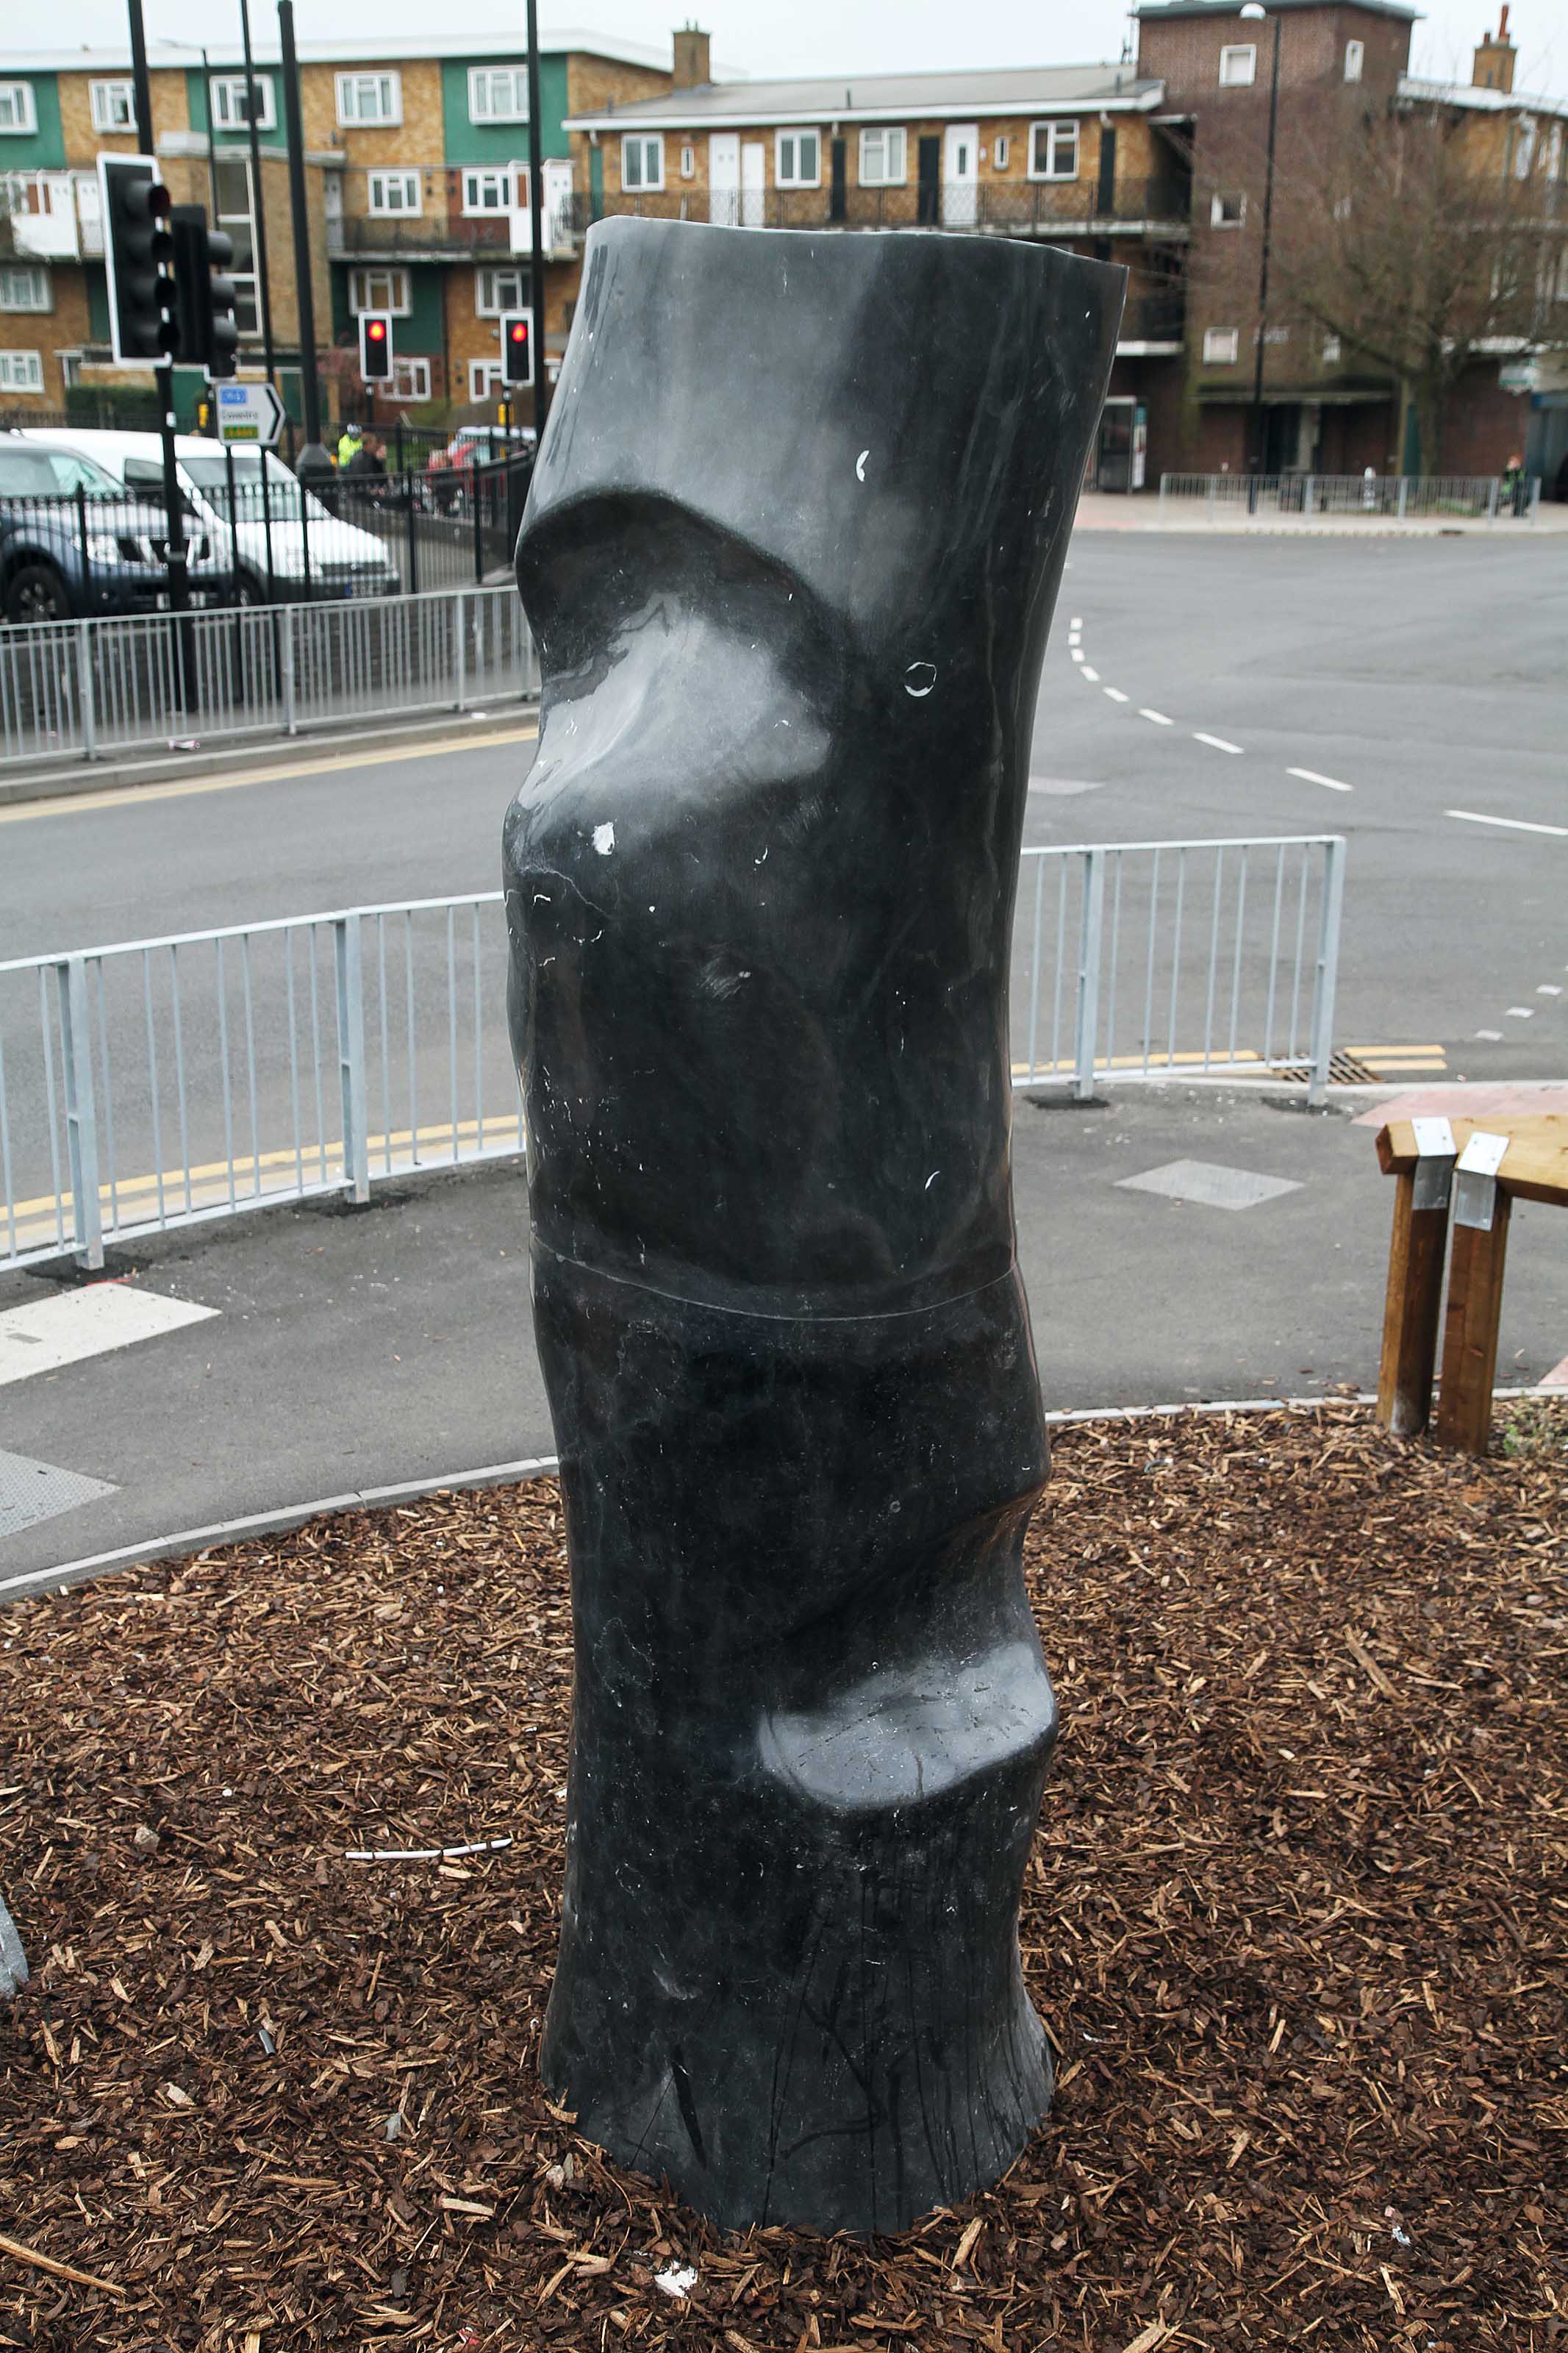 Ugly sculpture causes outrage